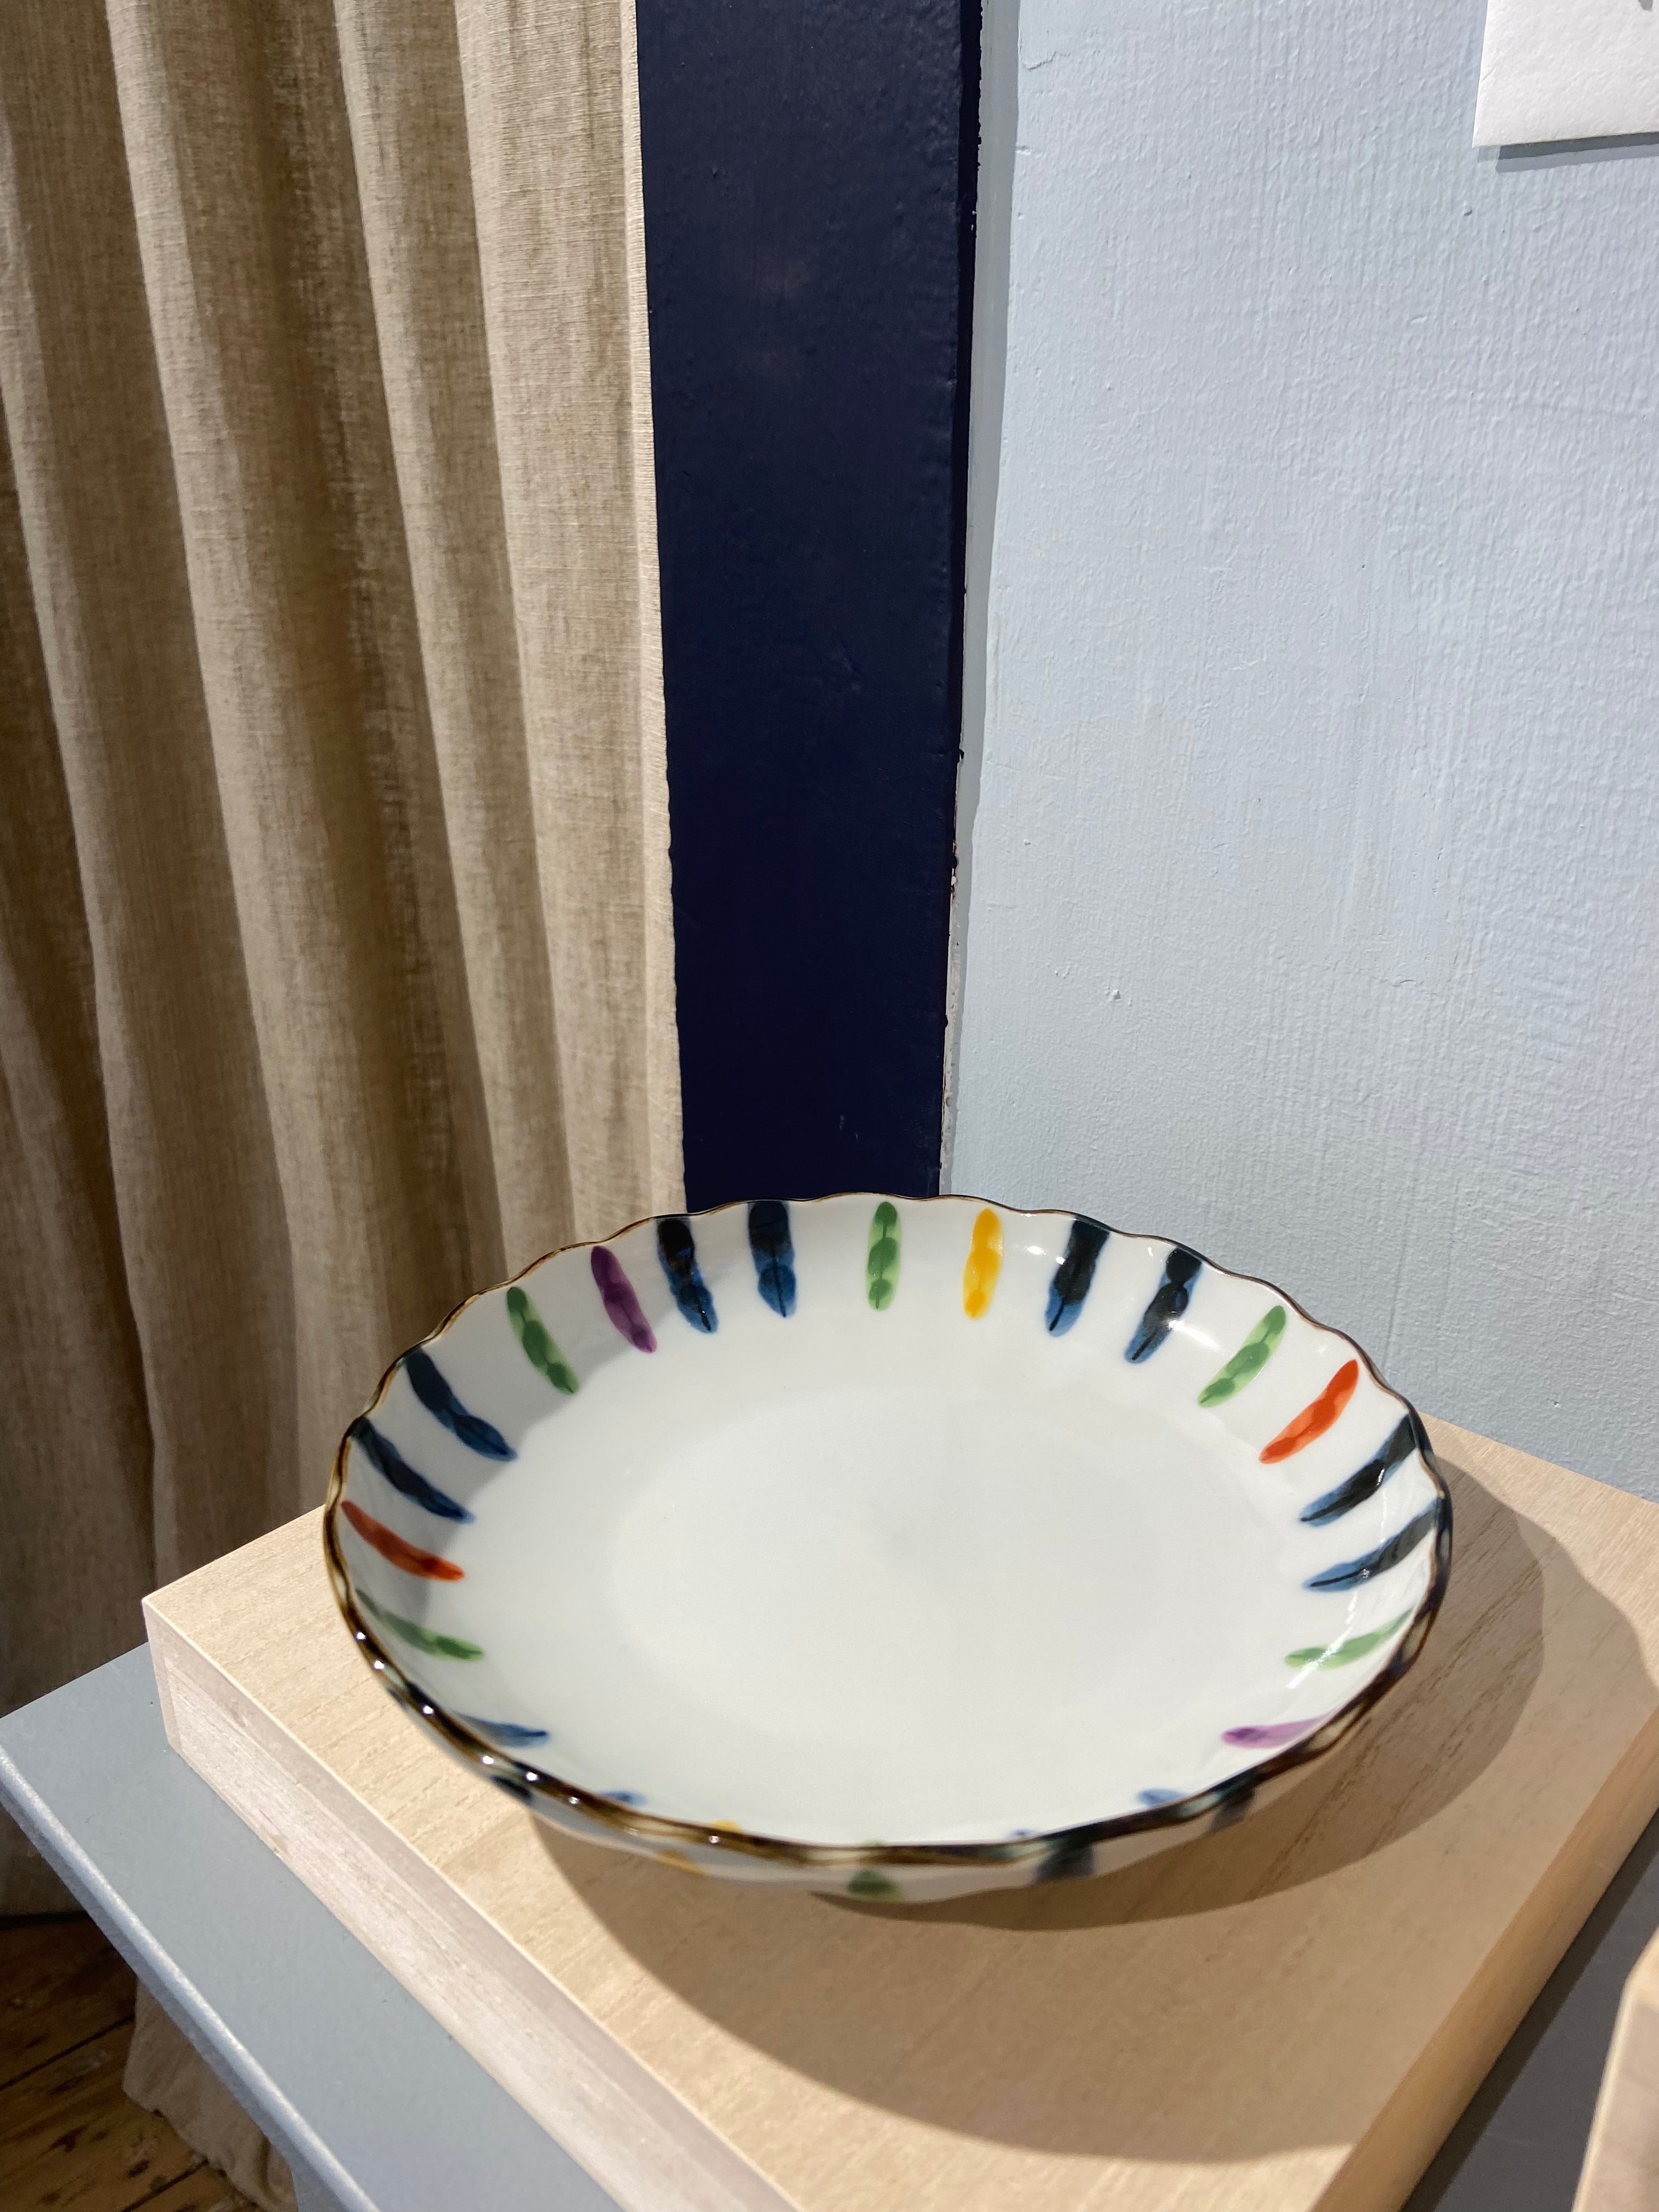 Hand painted plate with multicolored stripes